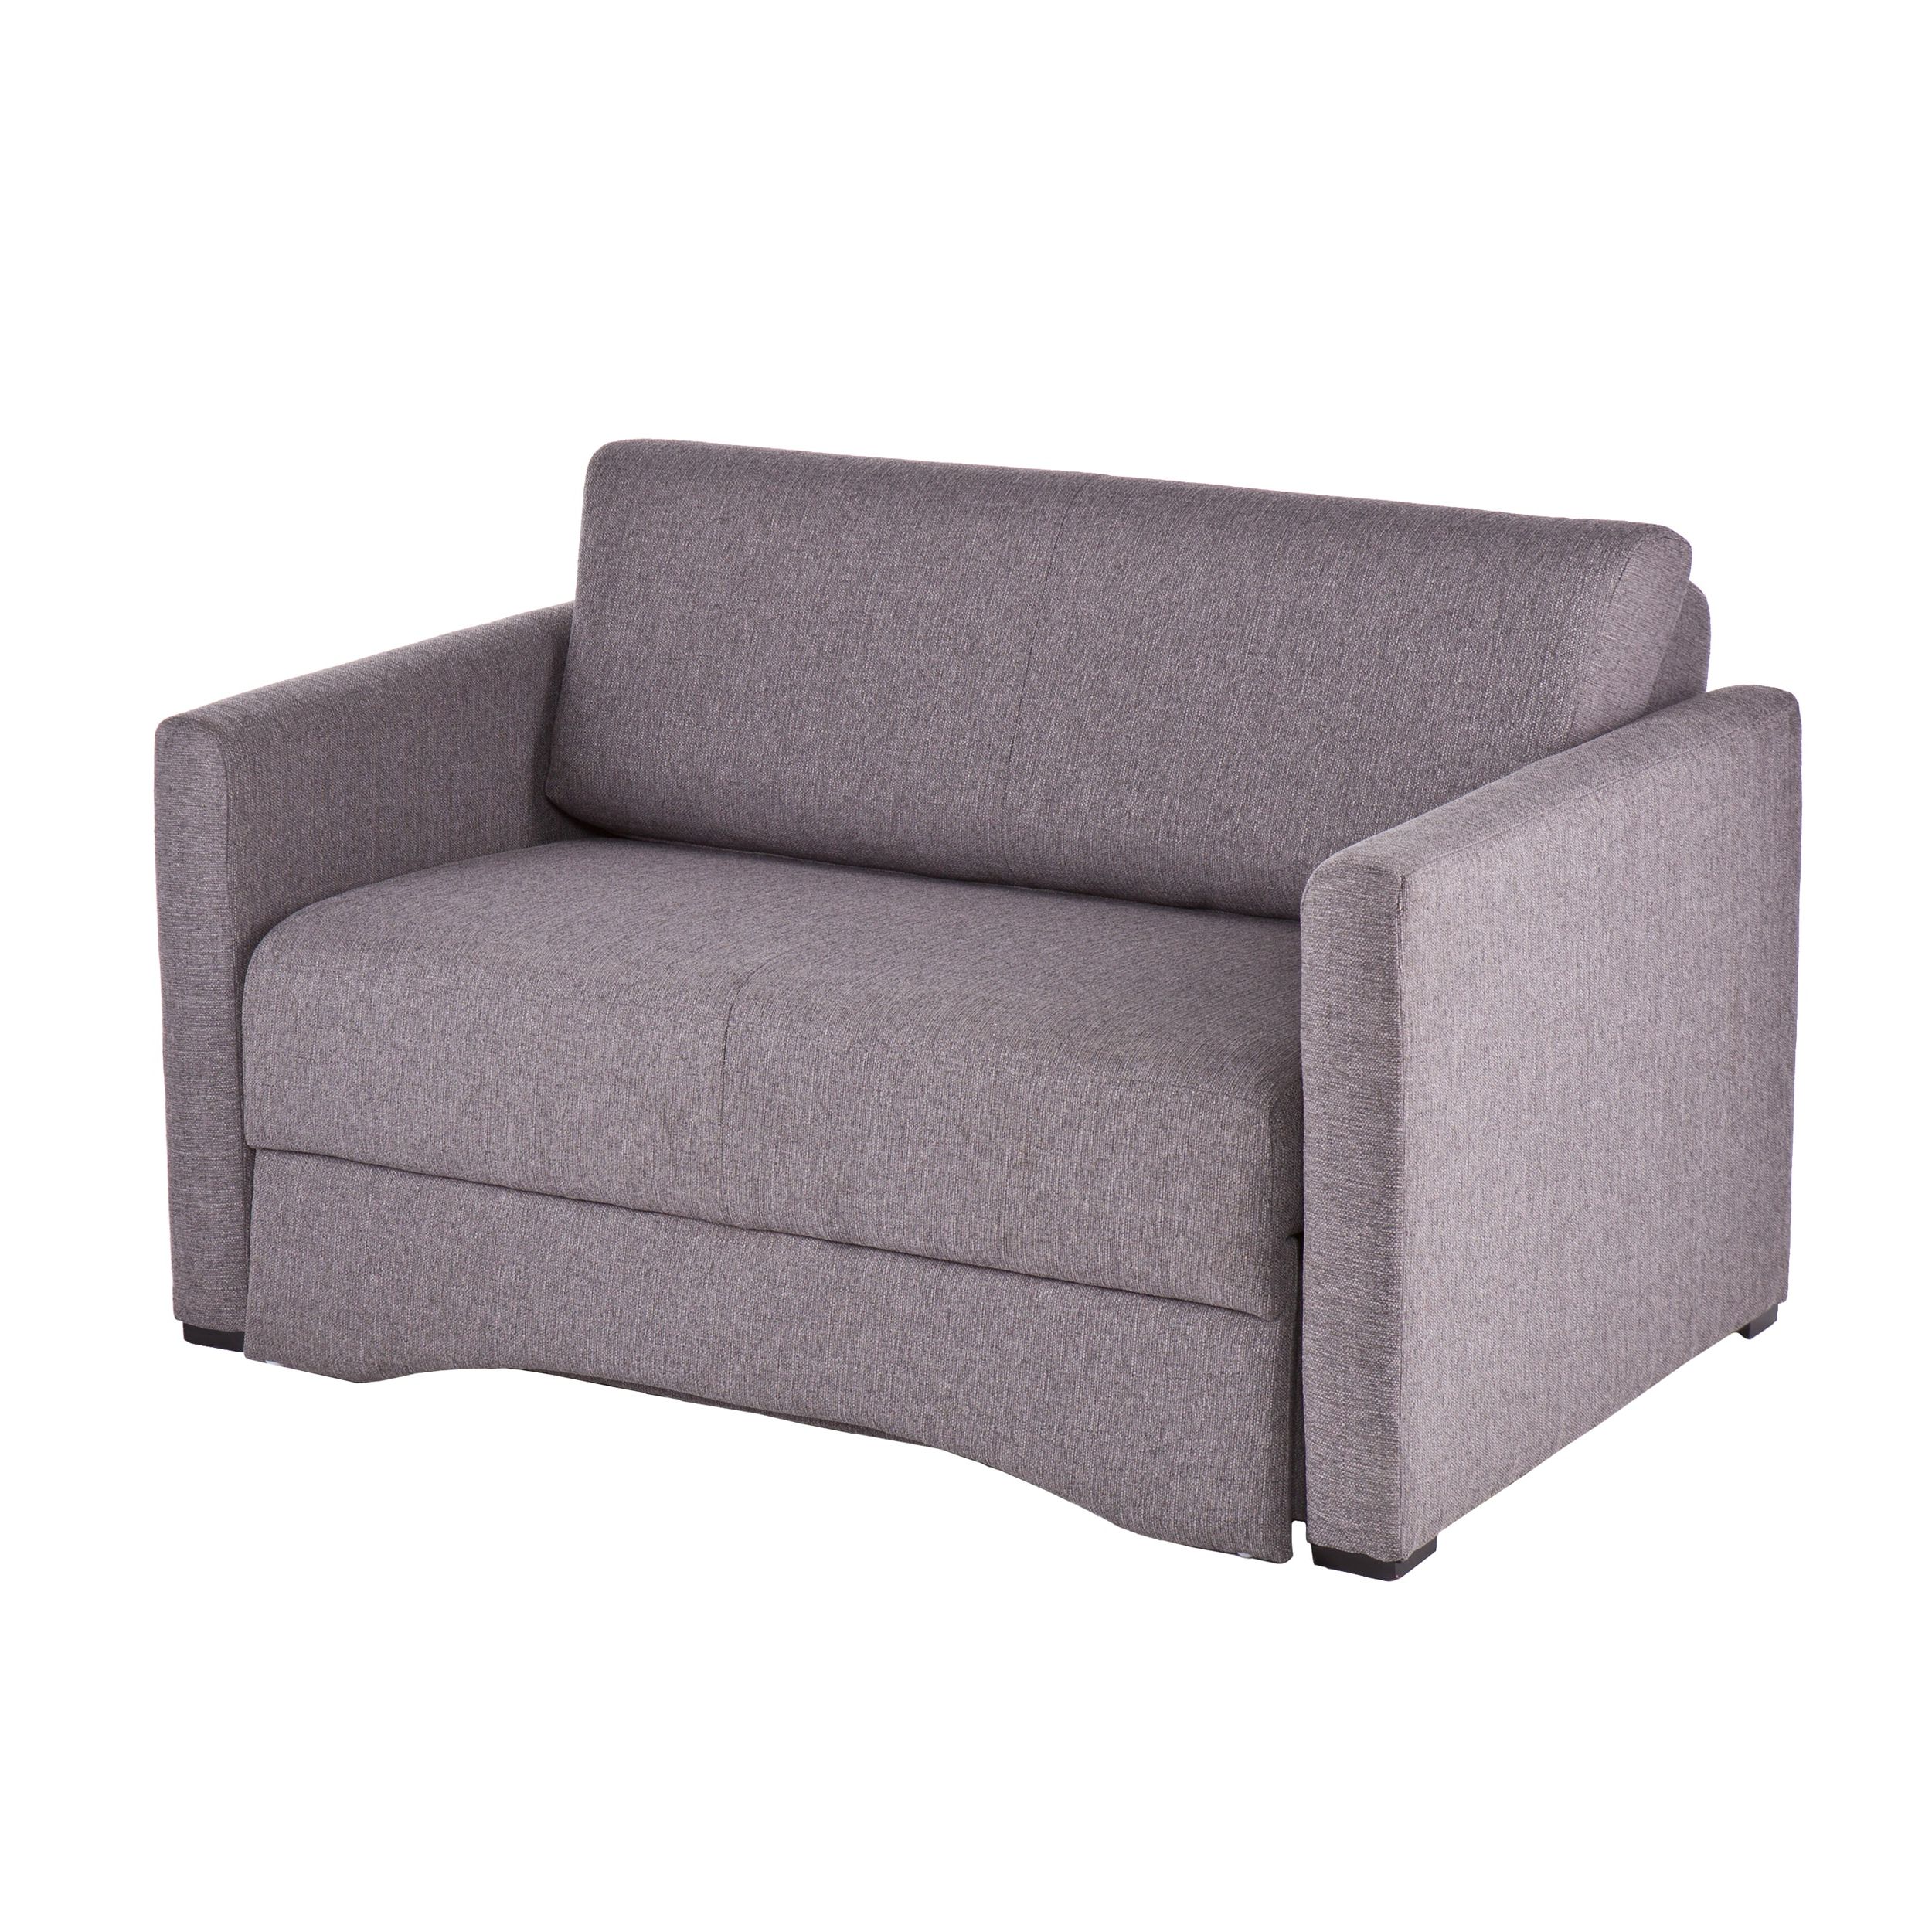 Famous Shop Harper Blvd Ventura Gray Loveseat Sleeper – Free Shipping Today Intended For Convertible Gray Loveseat Sleepers (View 9 of 15)